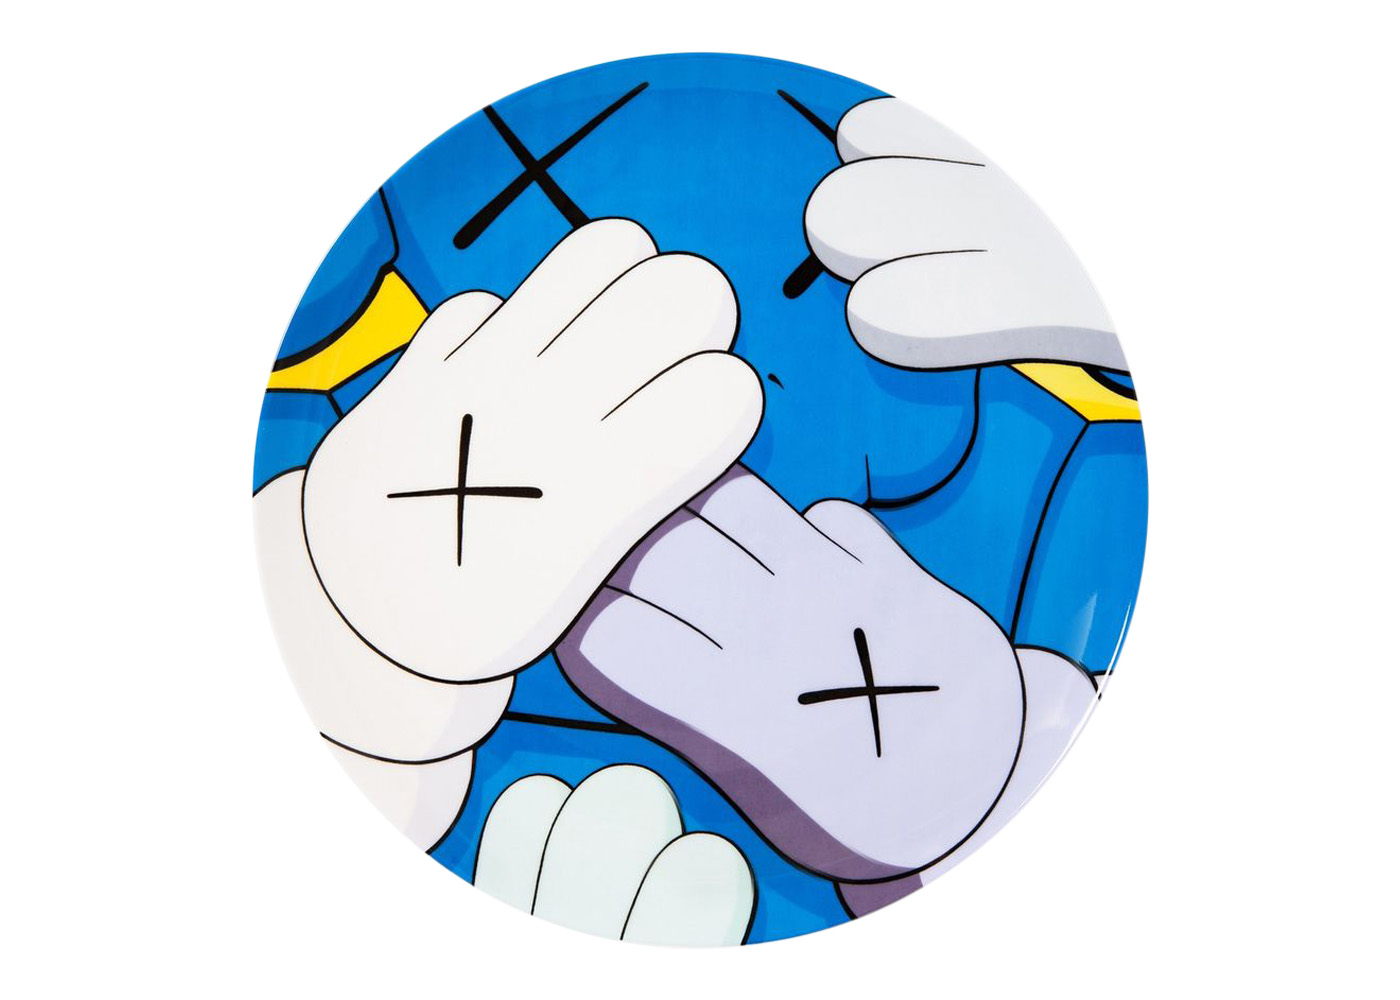 Artist Plate Project x KAWS URGE Plate (Edition of 250